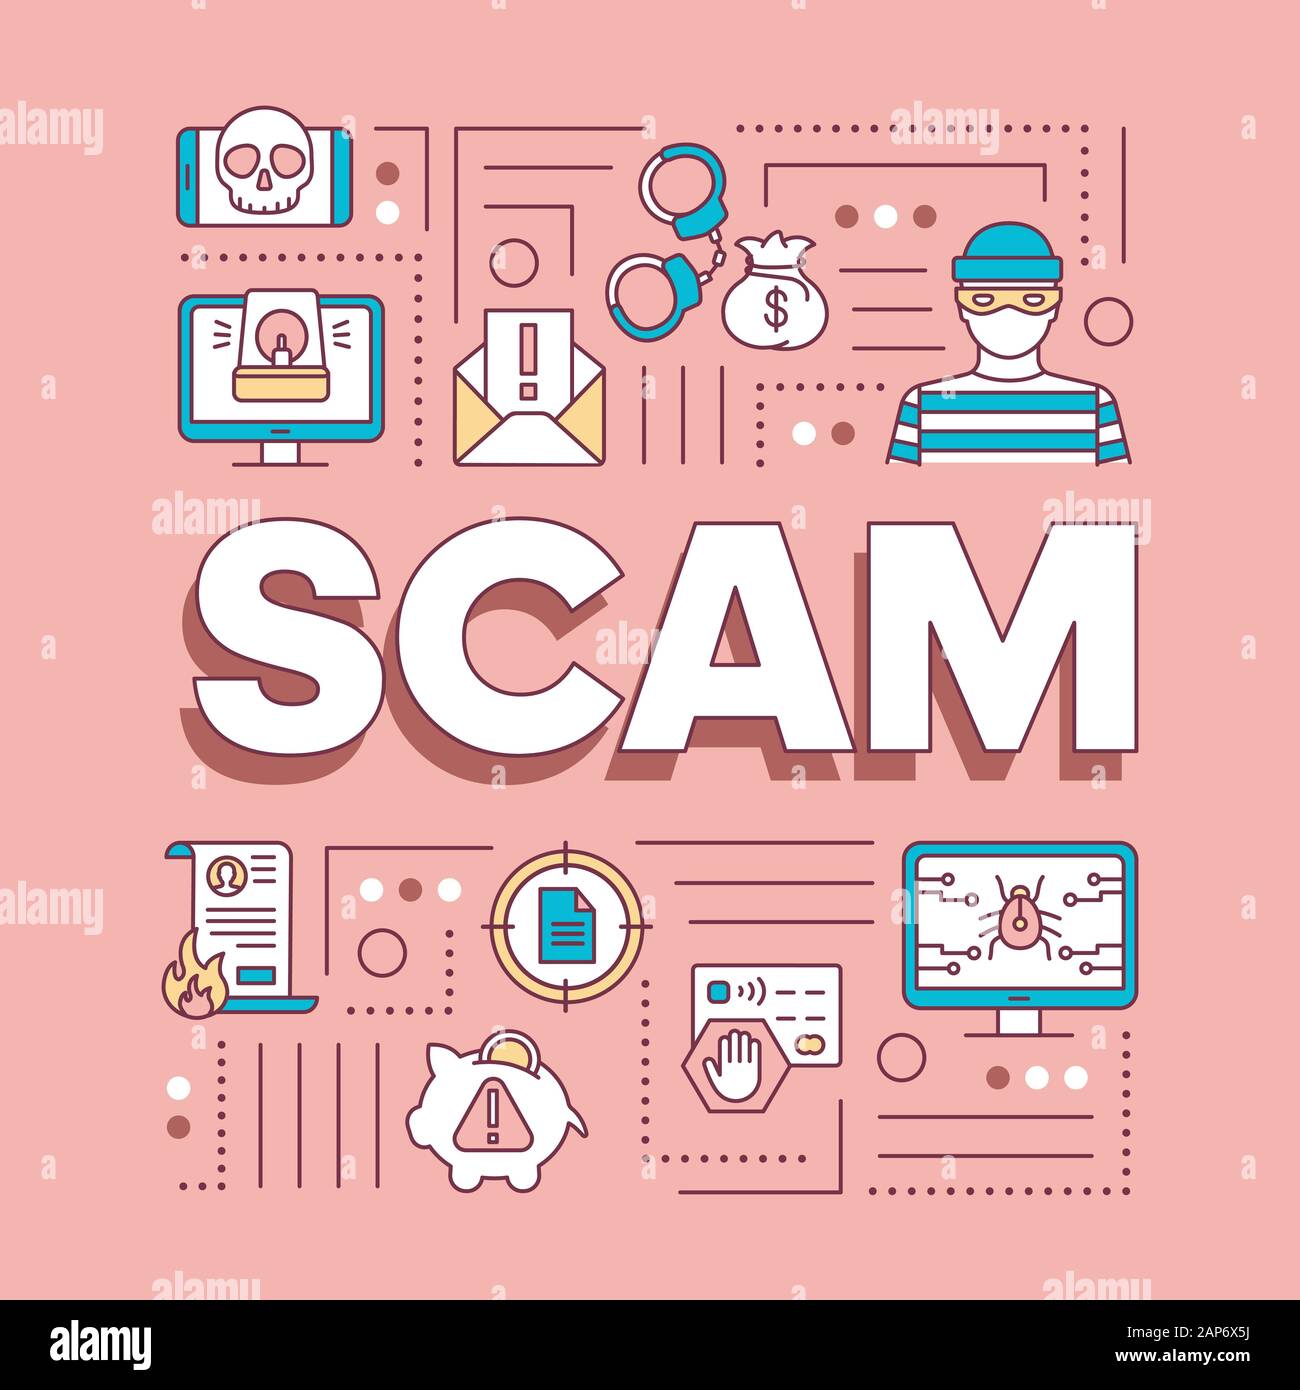 Scam word concepts banner. Illegal actions presentation, website. Fraud types. Internet crime. Bugs and virus. Isolated lettering typography idea with Stock Vector